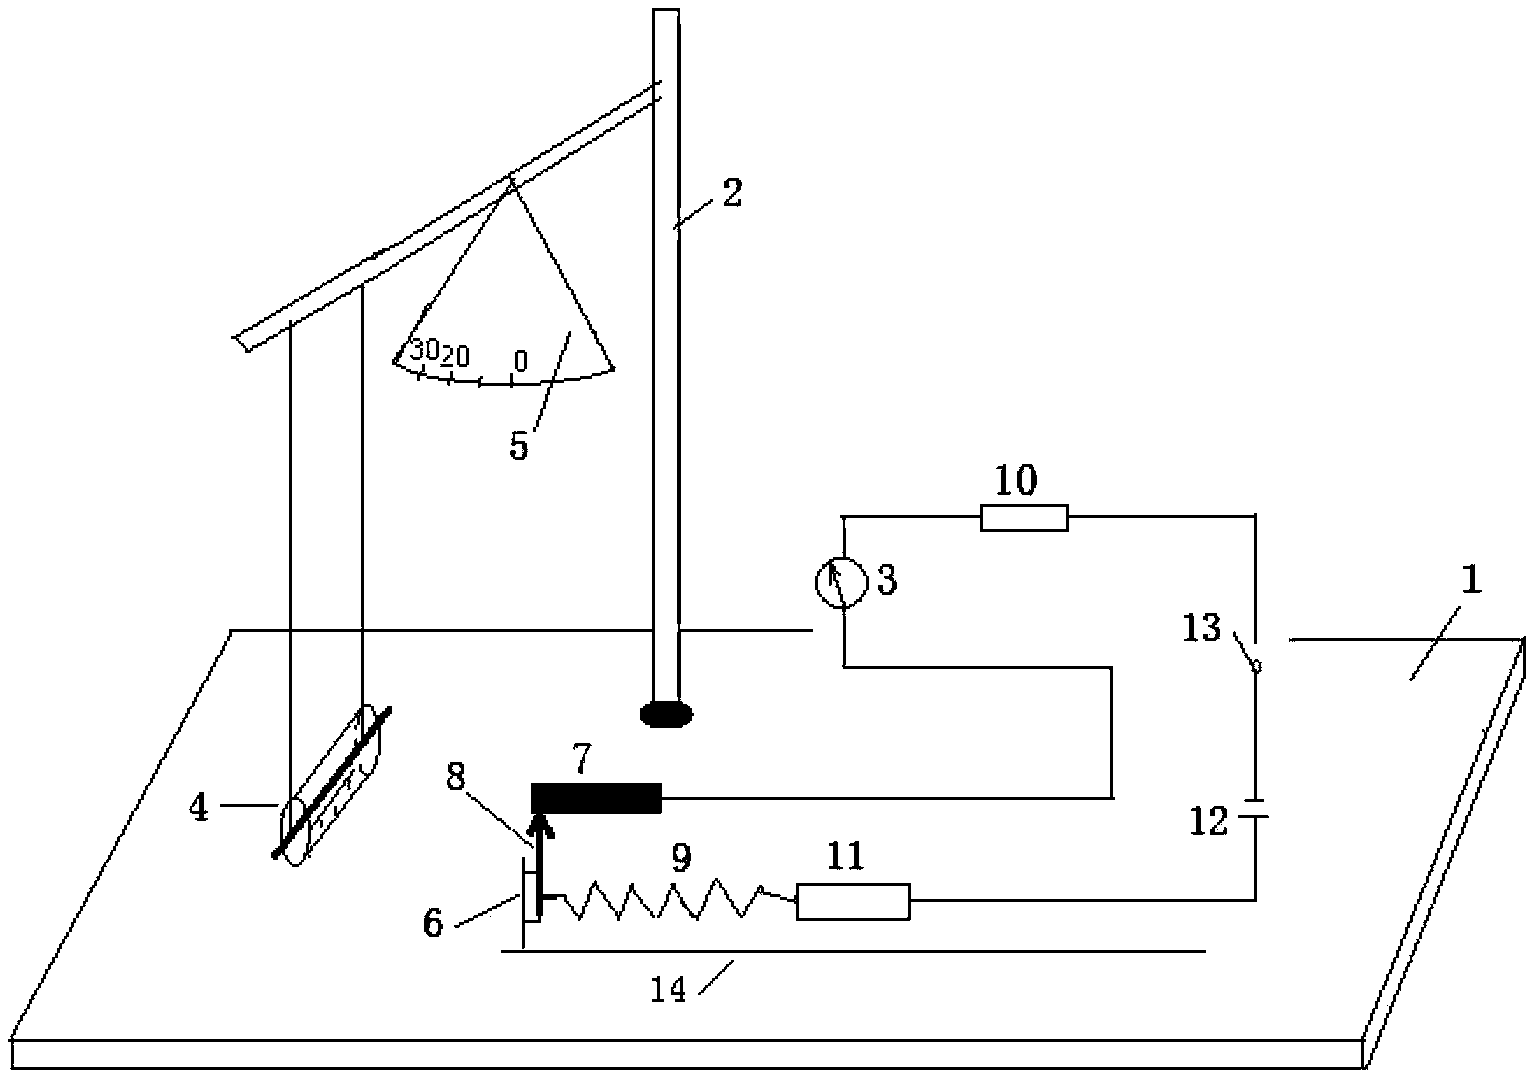 Experimental apparatus for exploring and demonstrating momentum theorem